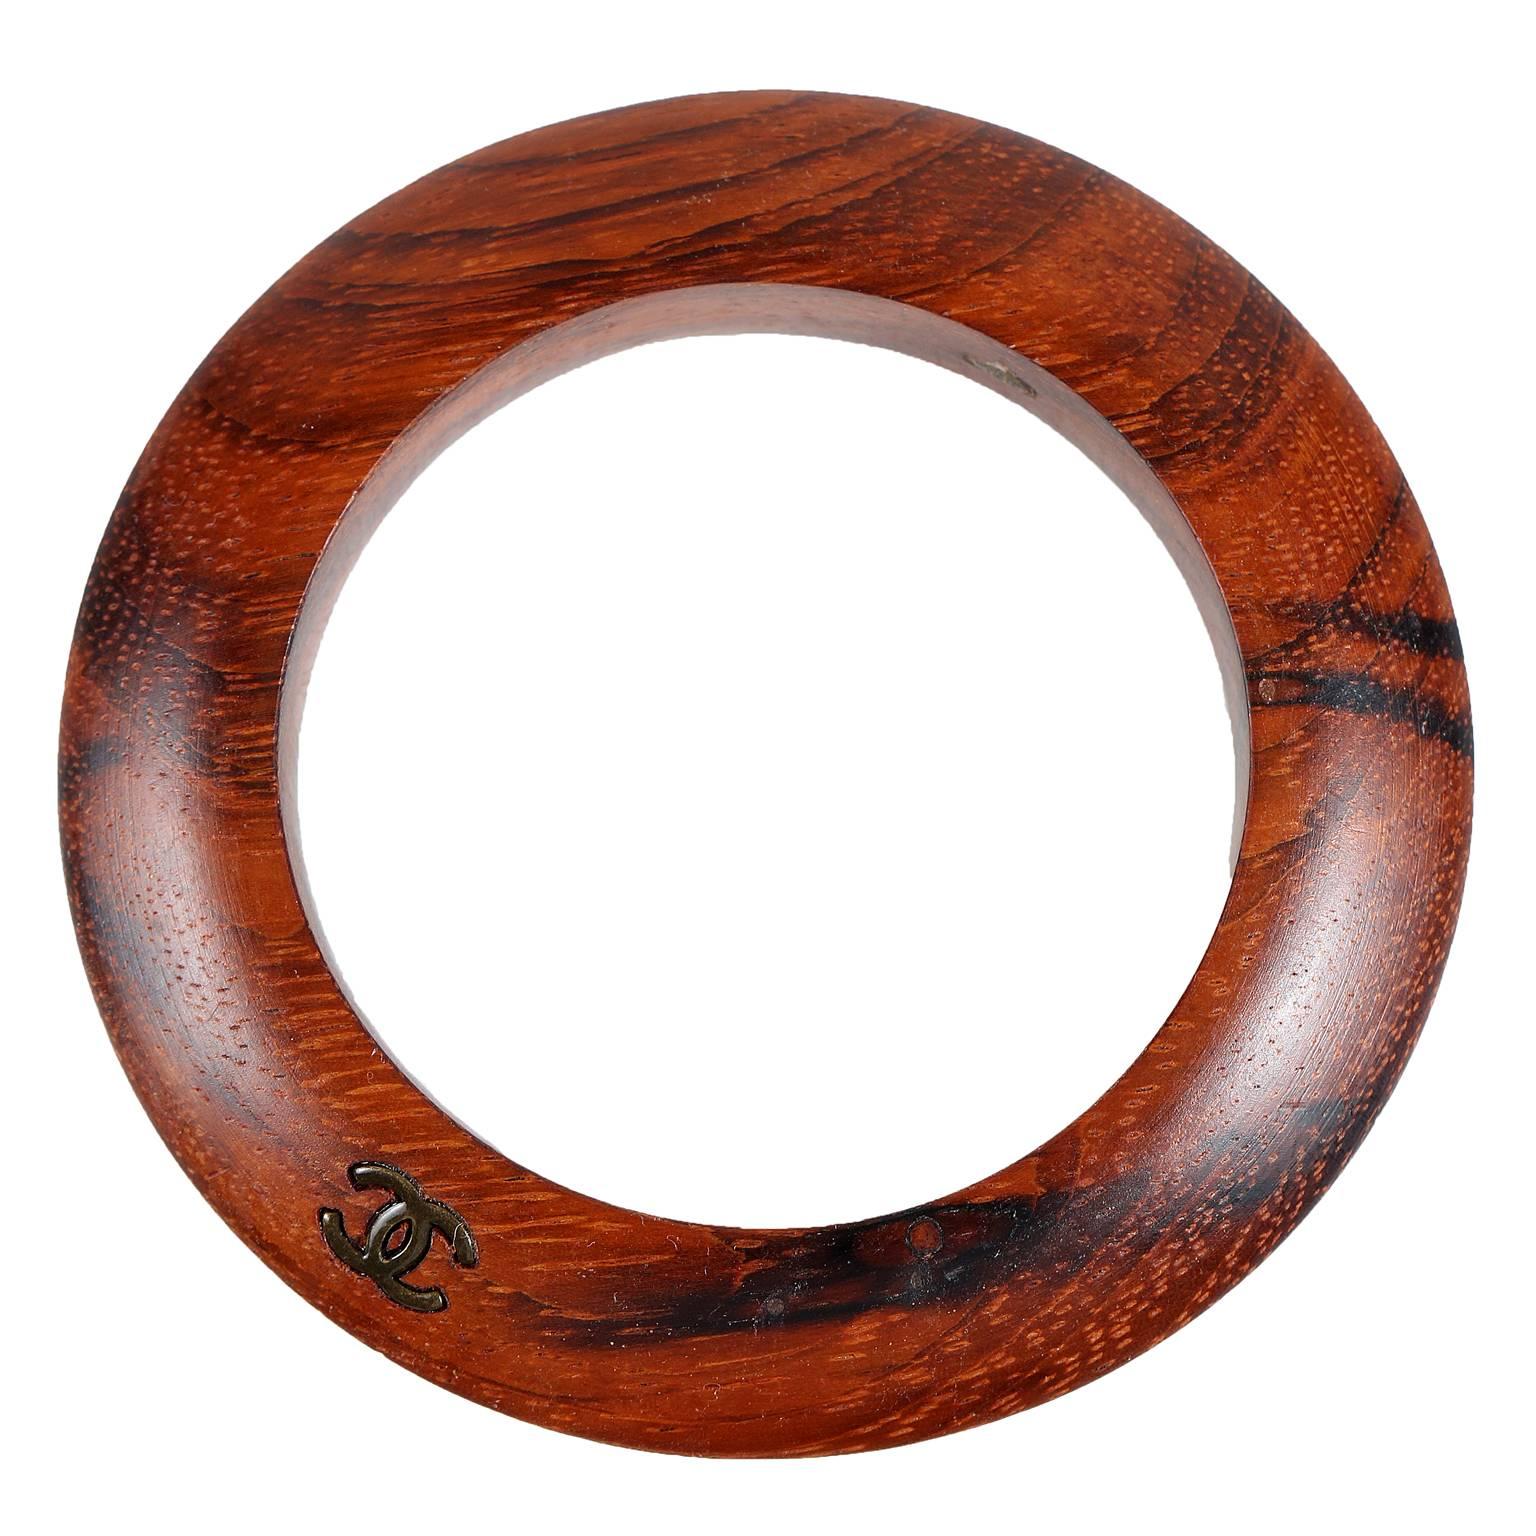 This authentic Chanel Wood Bangle Bracelet is a very rare piece in pristine condition.
Warm and unpretentious, this wood bangle has tapered edges and small interlocking CC logo.  Wear with everything.
A191

